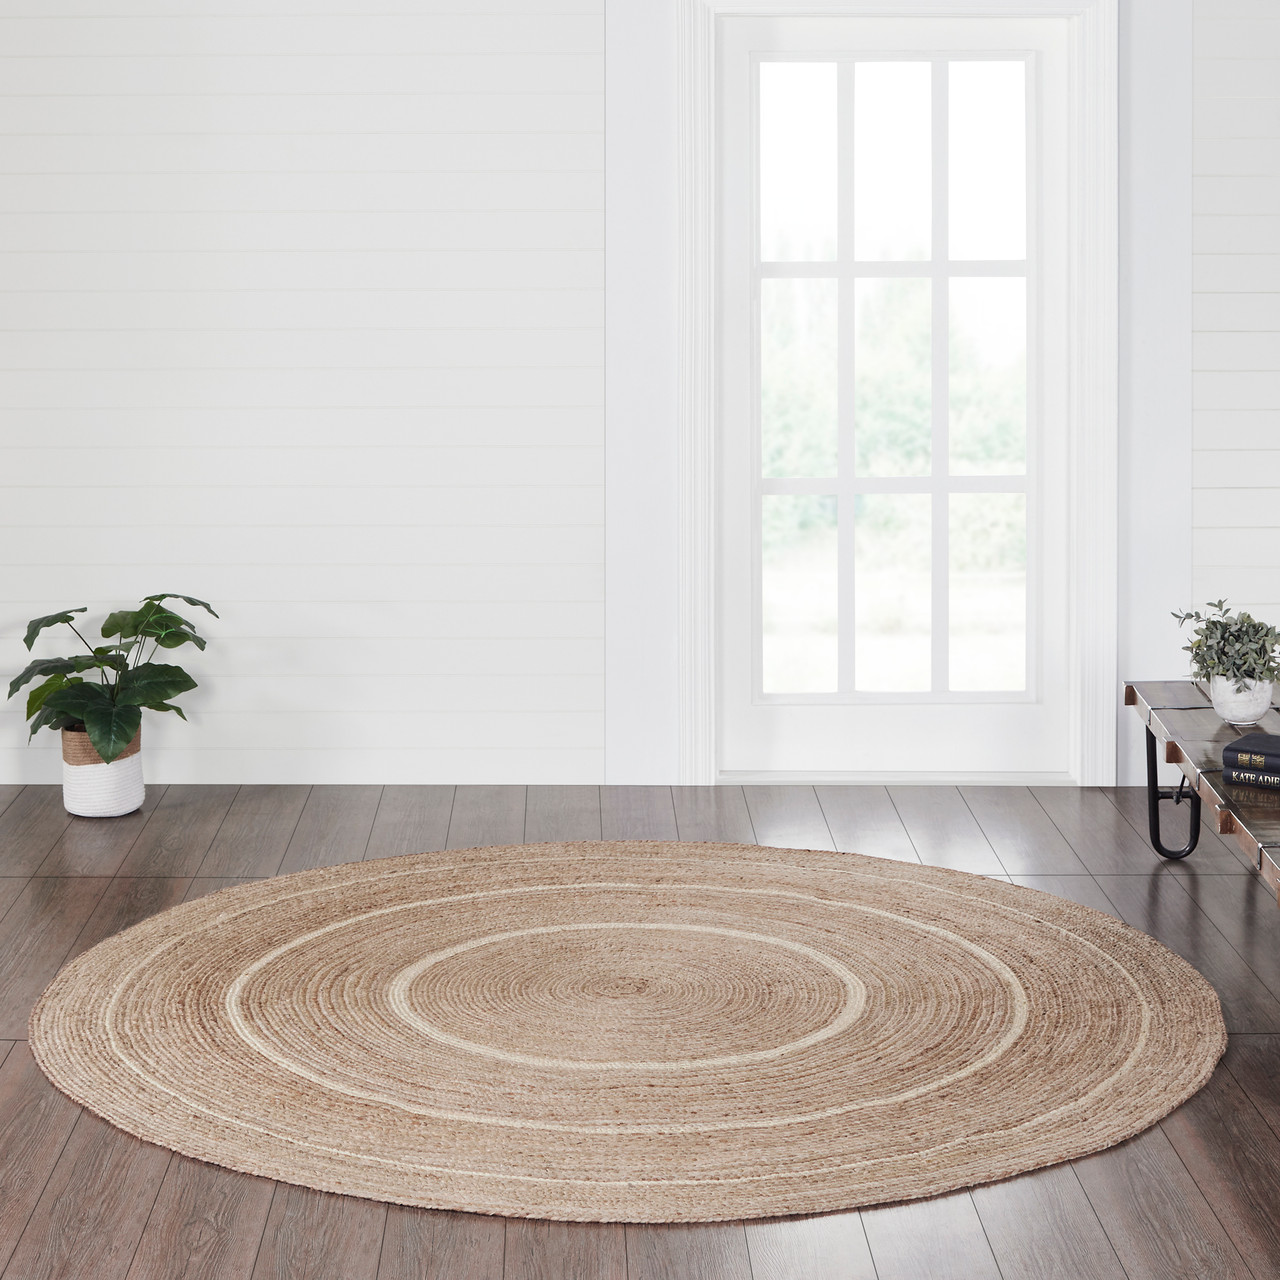 VHC Brands - Natural & Cream Jute Braided Area Rug - 60 x 96 Oval